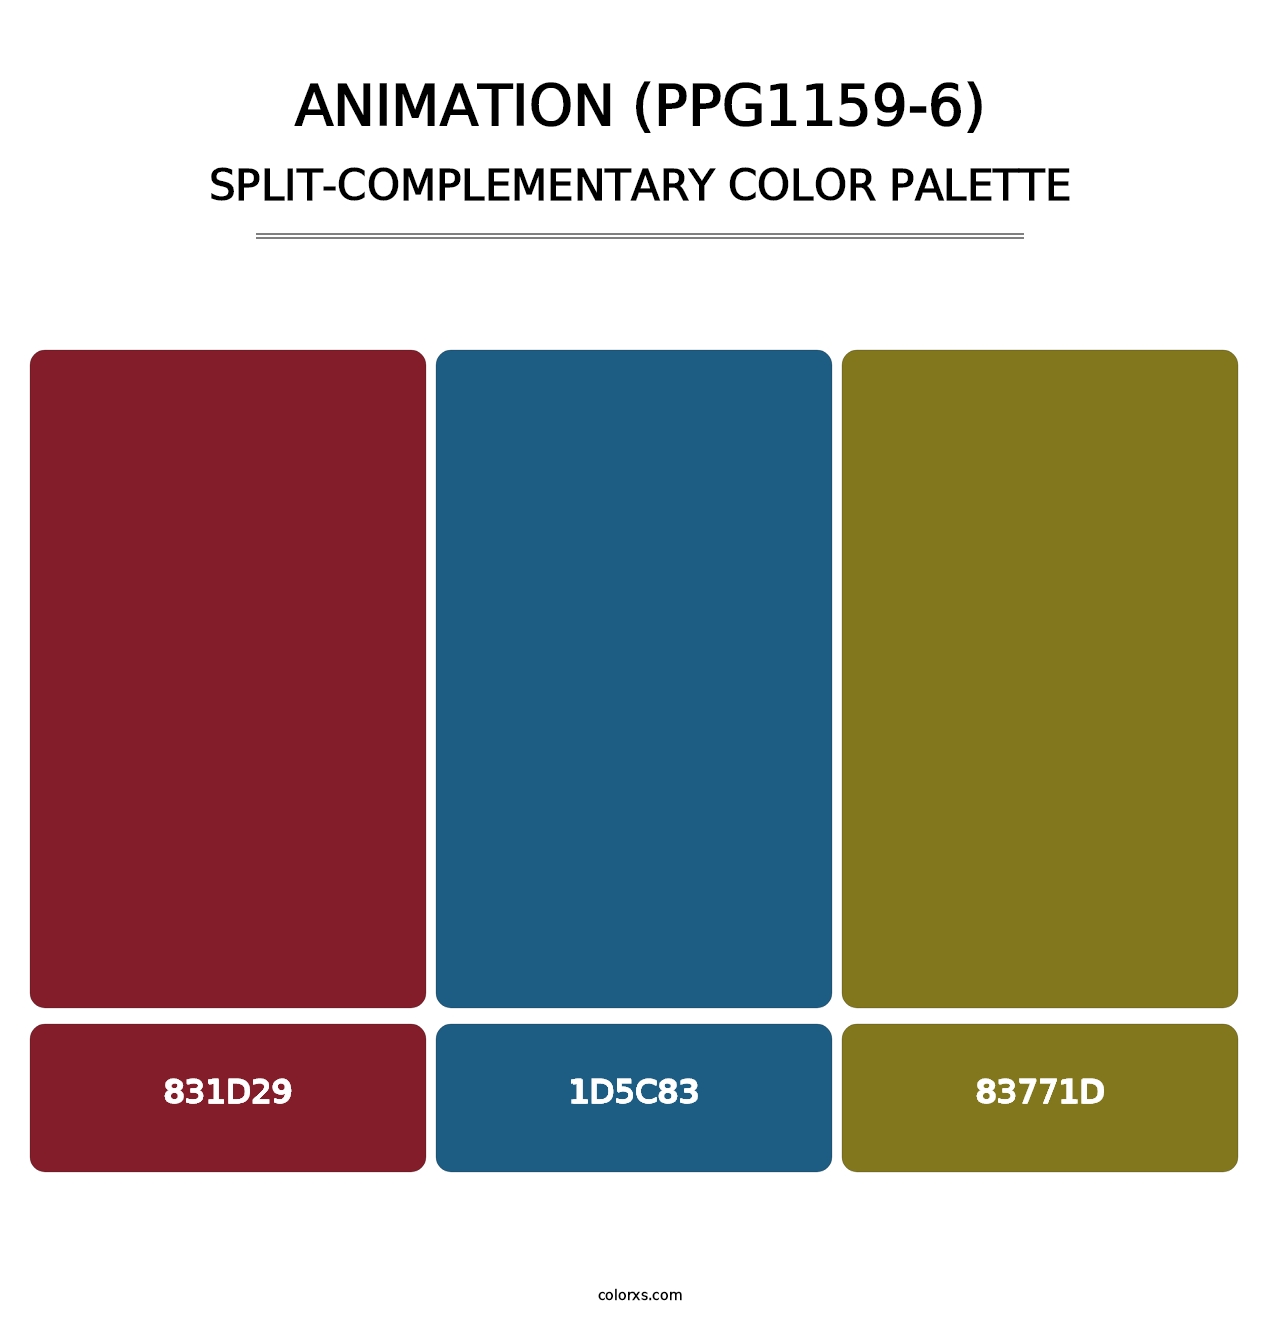 Animation (PPG1159-6) - Split-Complementary Color Palette